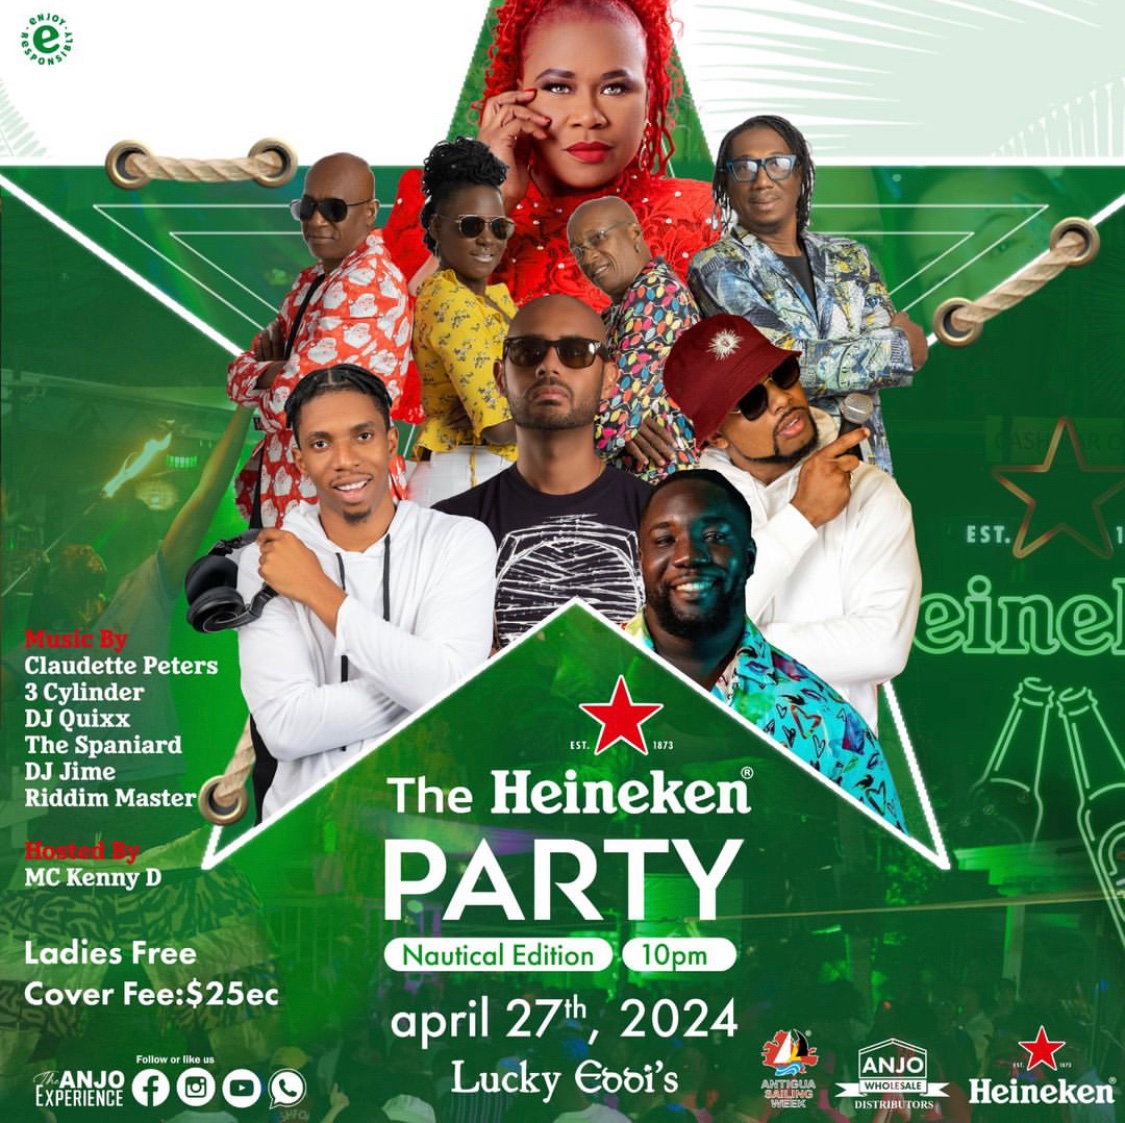 Anyways the Heineken party is this Saturday at Lucky Eddi’s